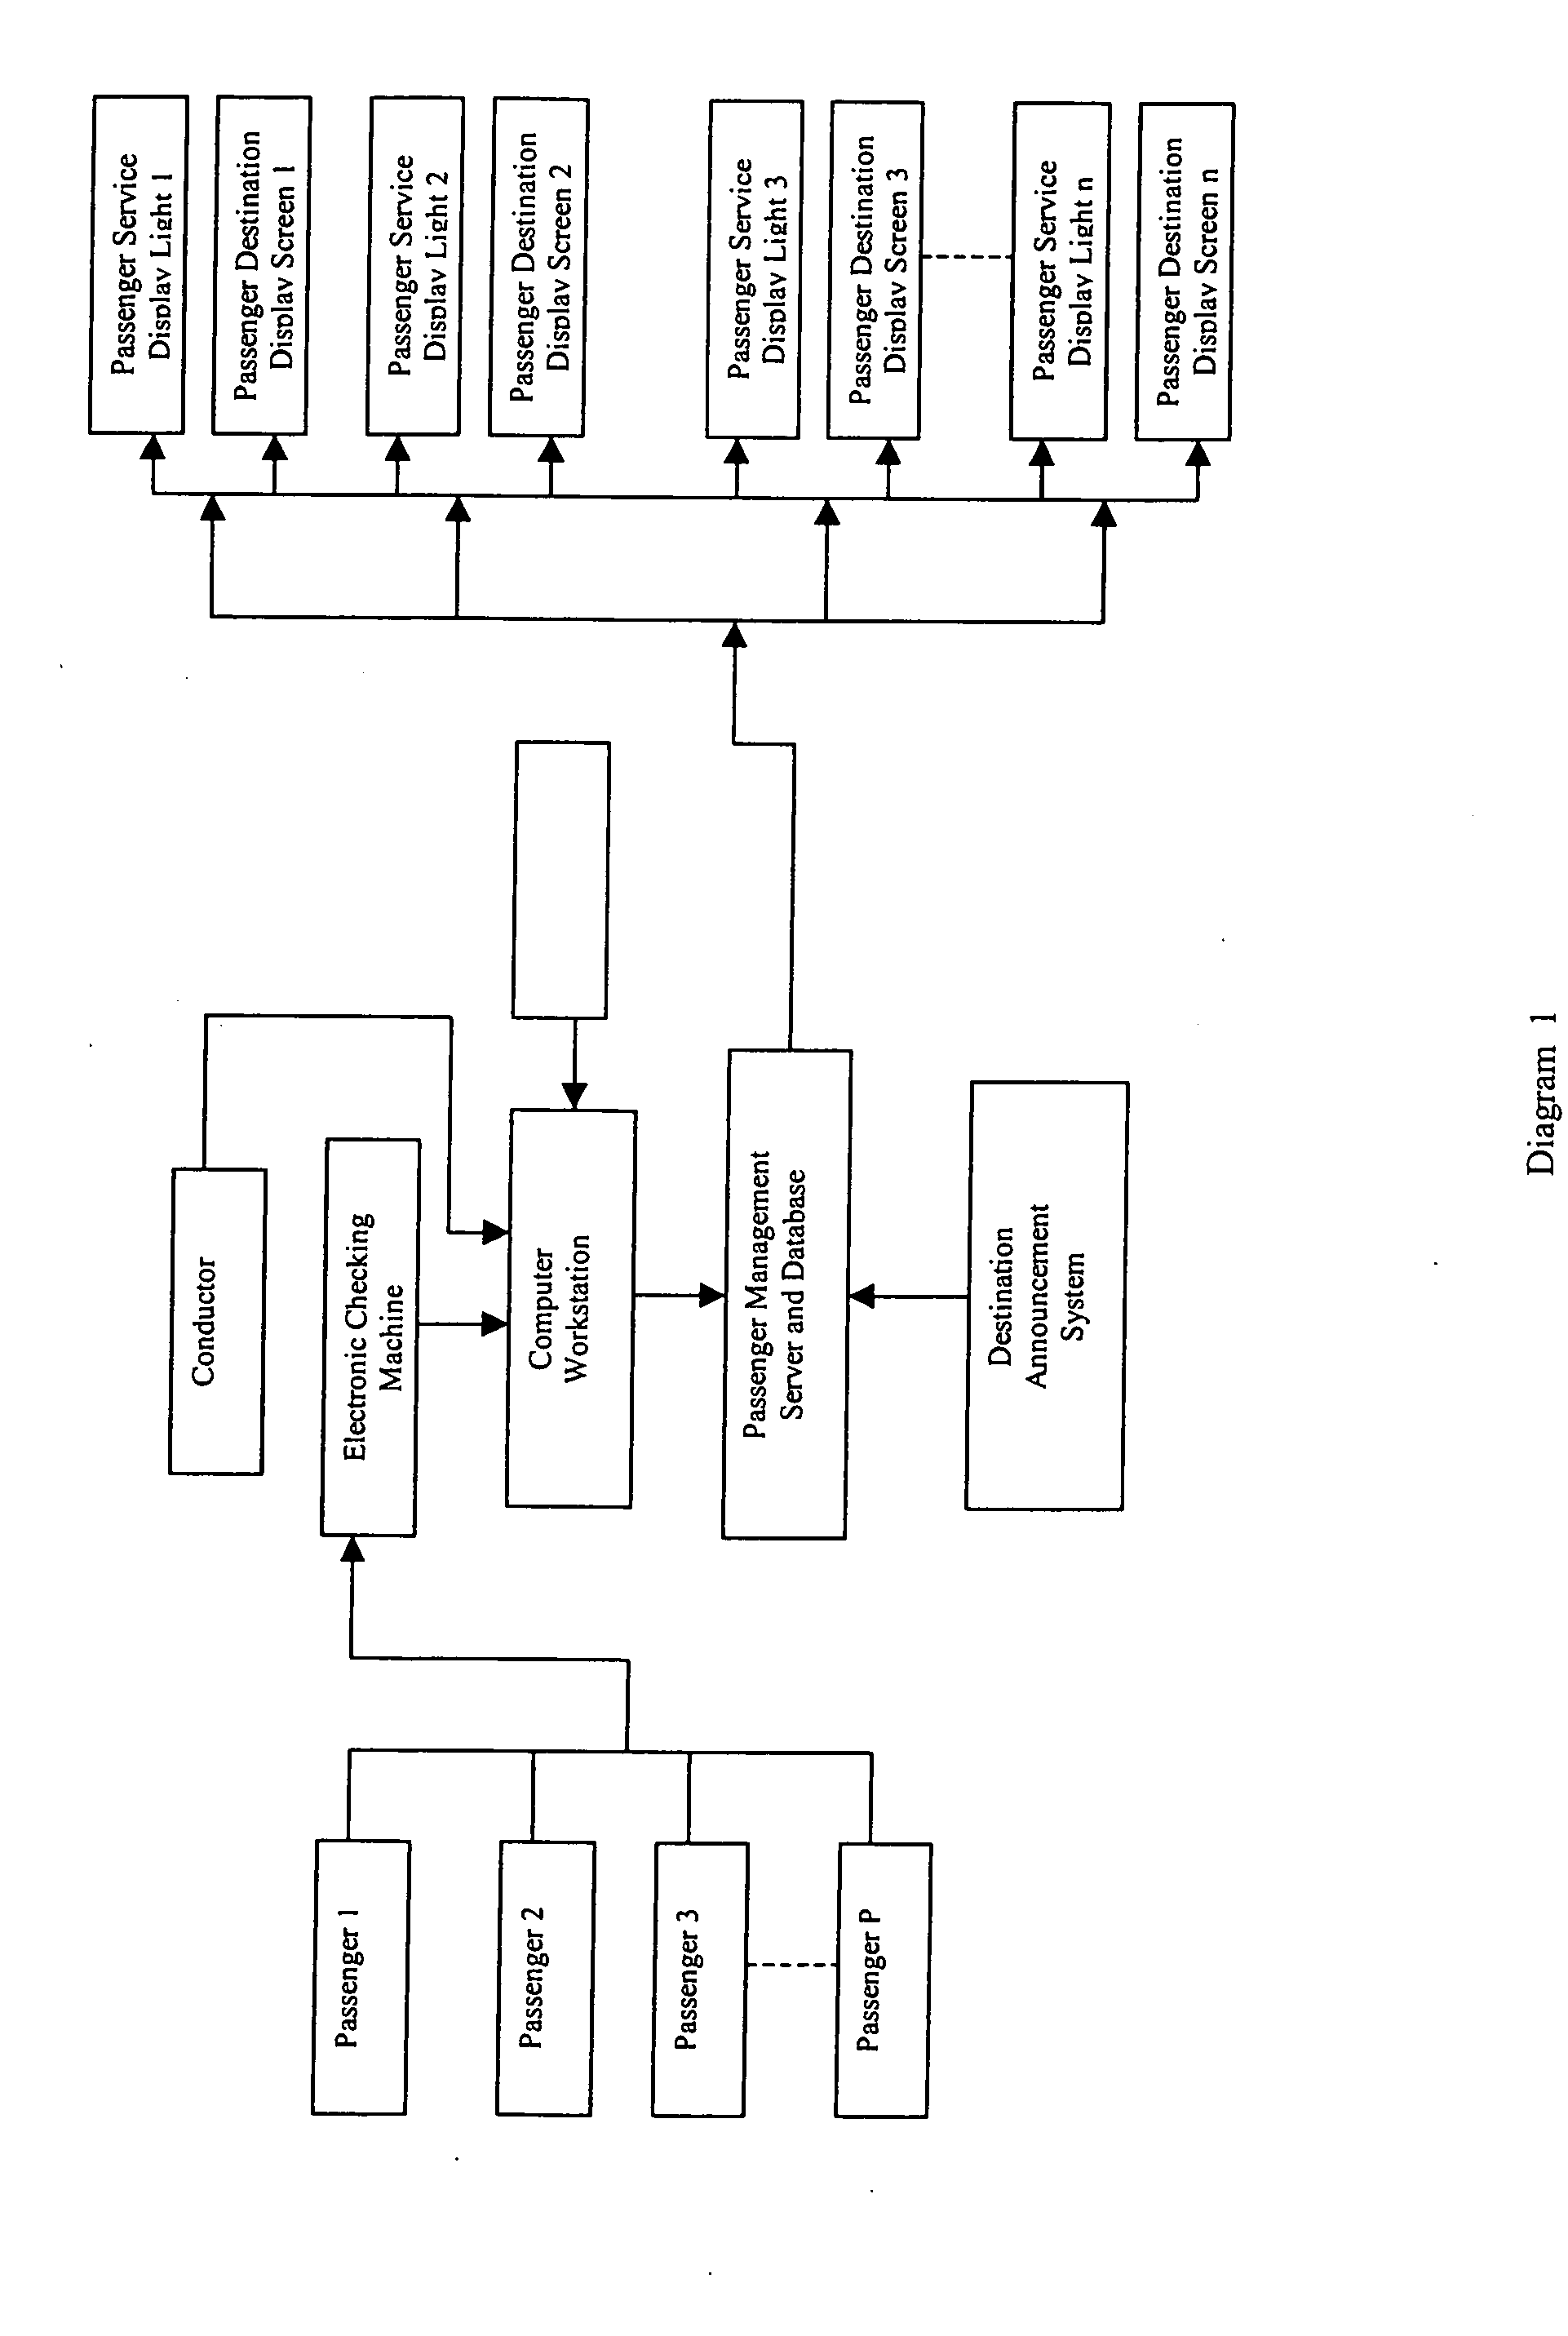 Electronic passenger management method and system in railroad passenger cars/long-distance buses